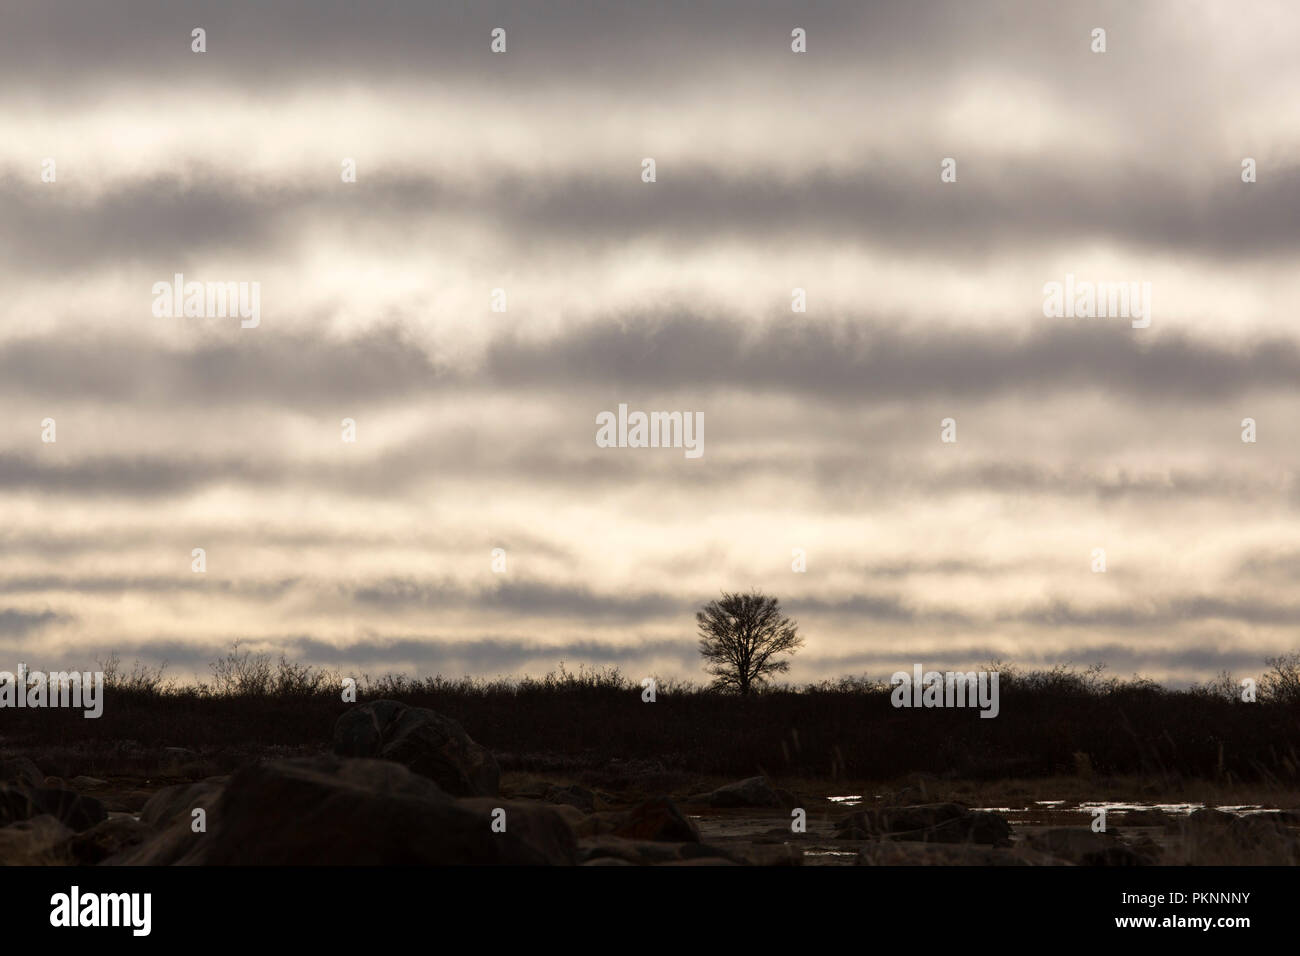 Clouds band the sky on a tundra landscape in Manitoba, Canada. A lone tree stands on the horizon. Stock Photo